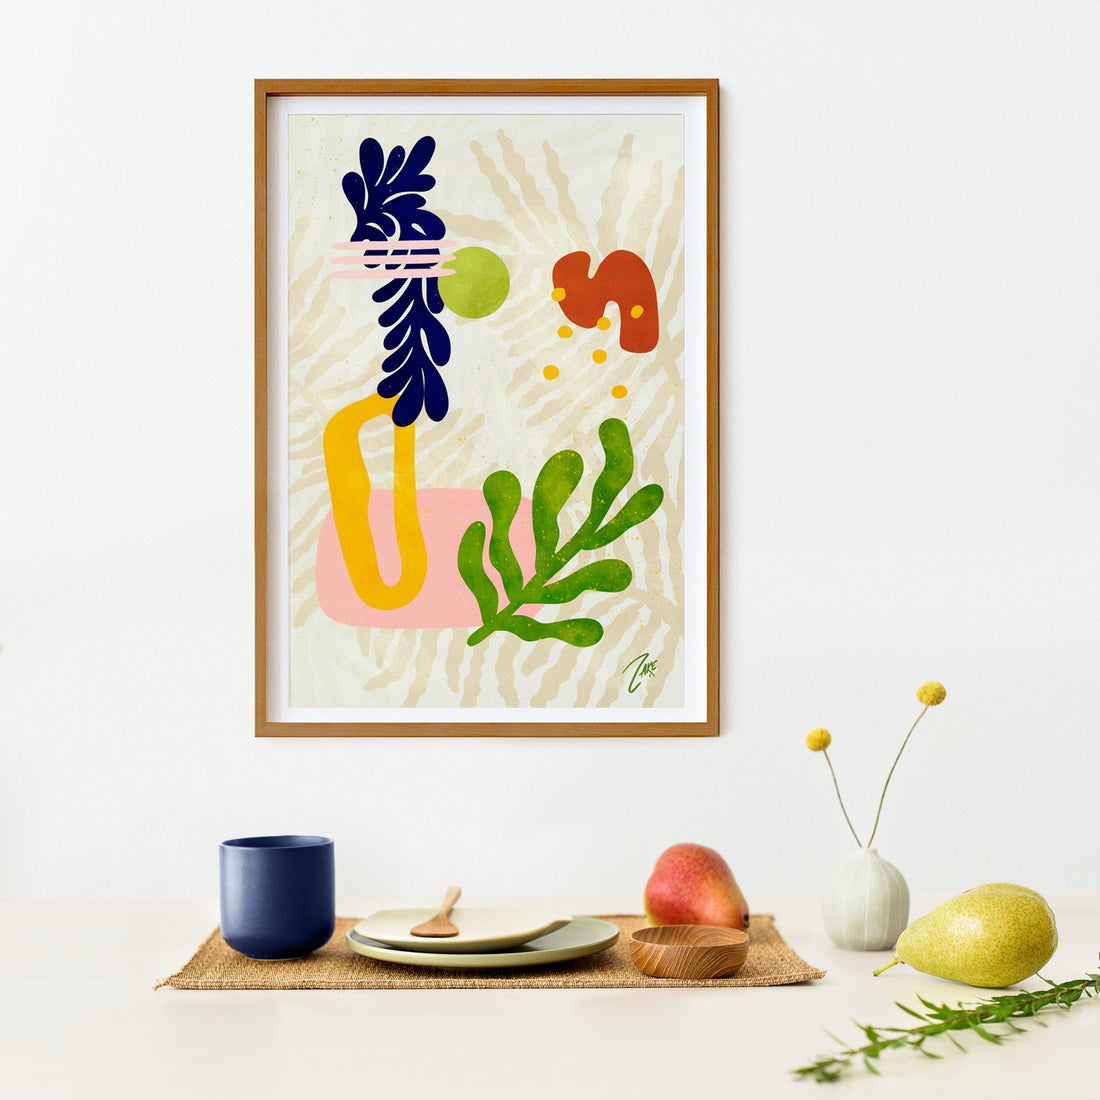 Abstract shapes of summer wall art poster for kitchen interior